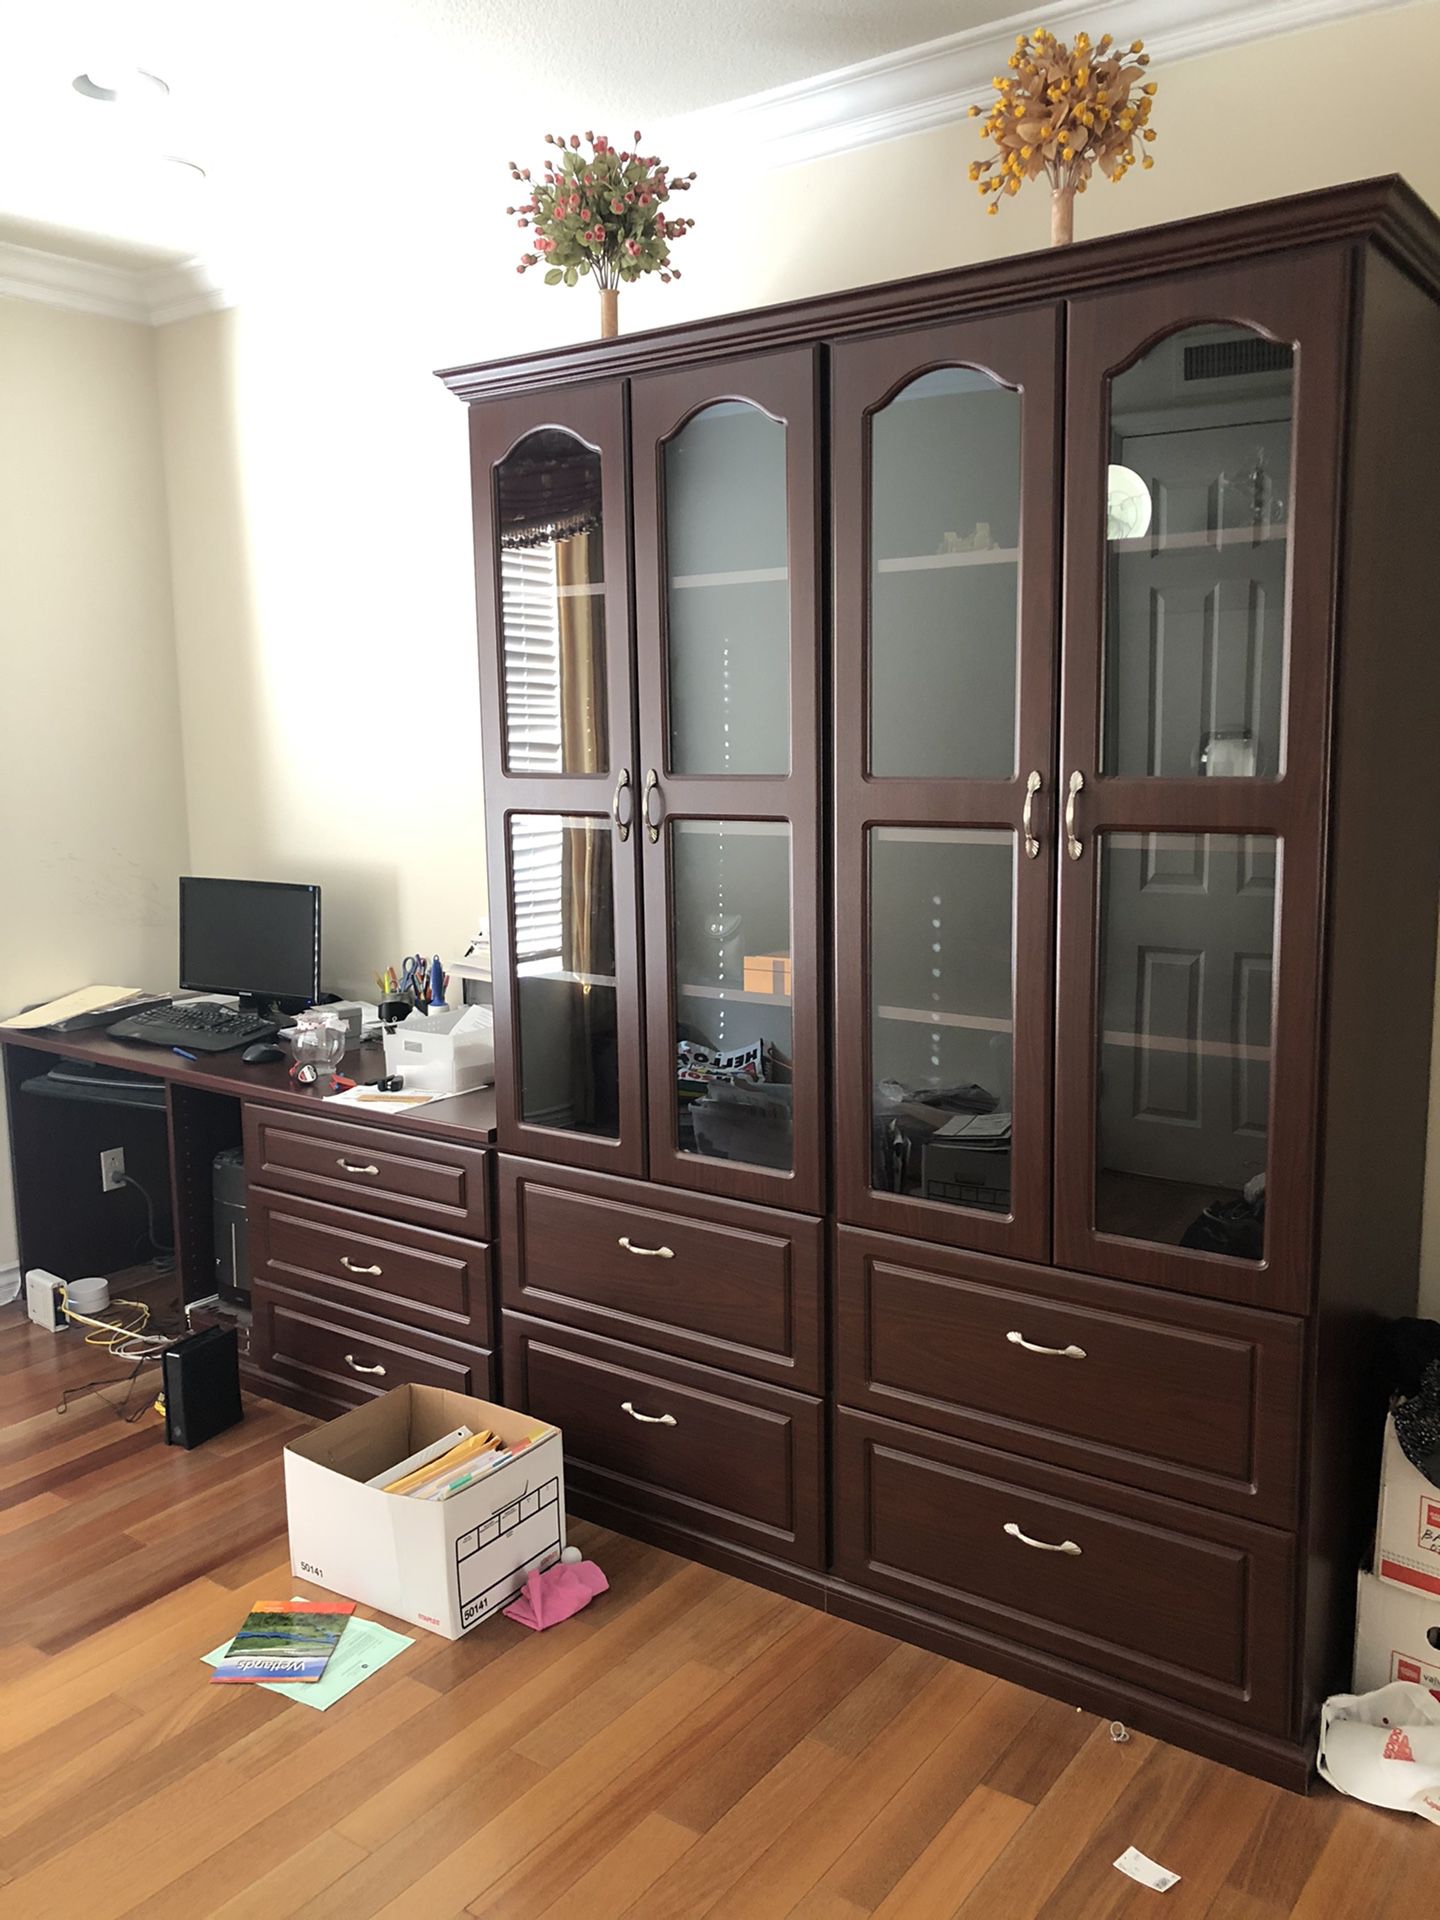 Desk and Cabinet built-in look! Free! Must pick up today!